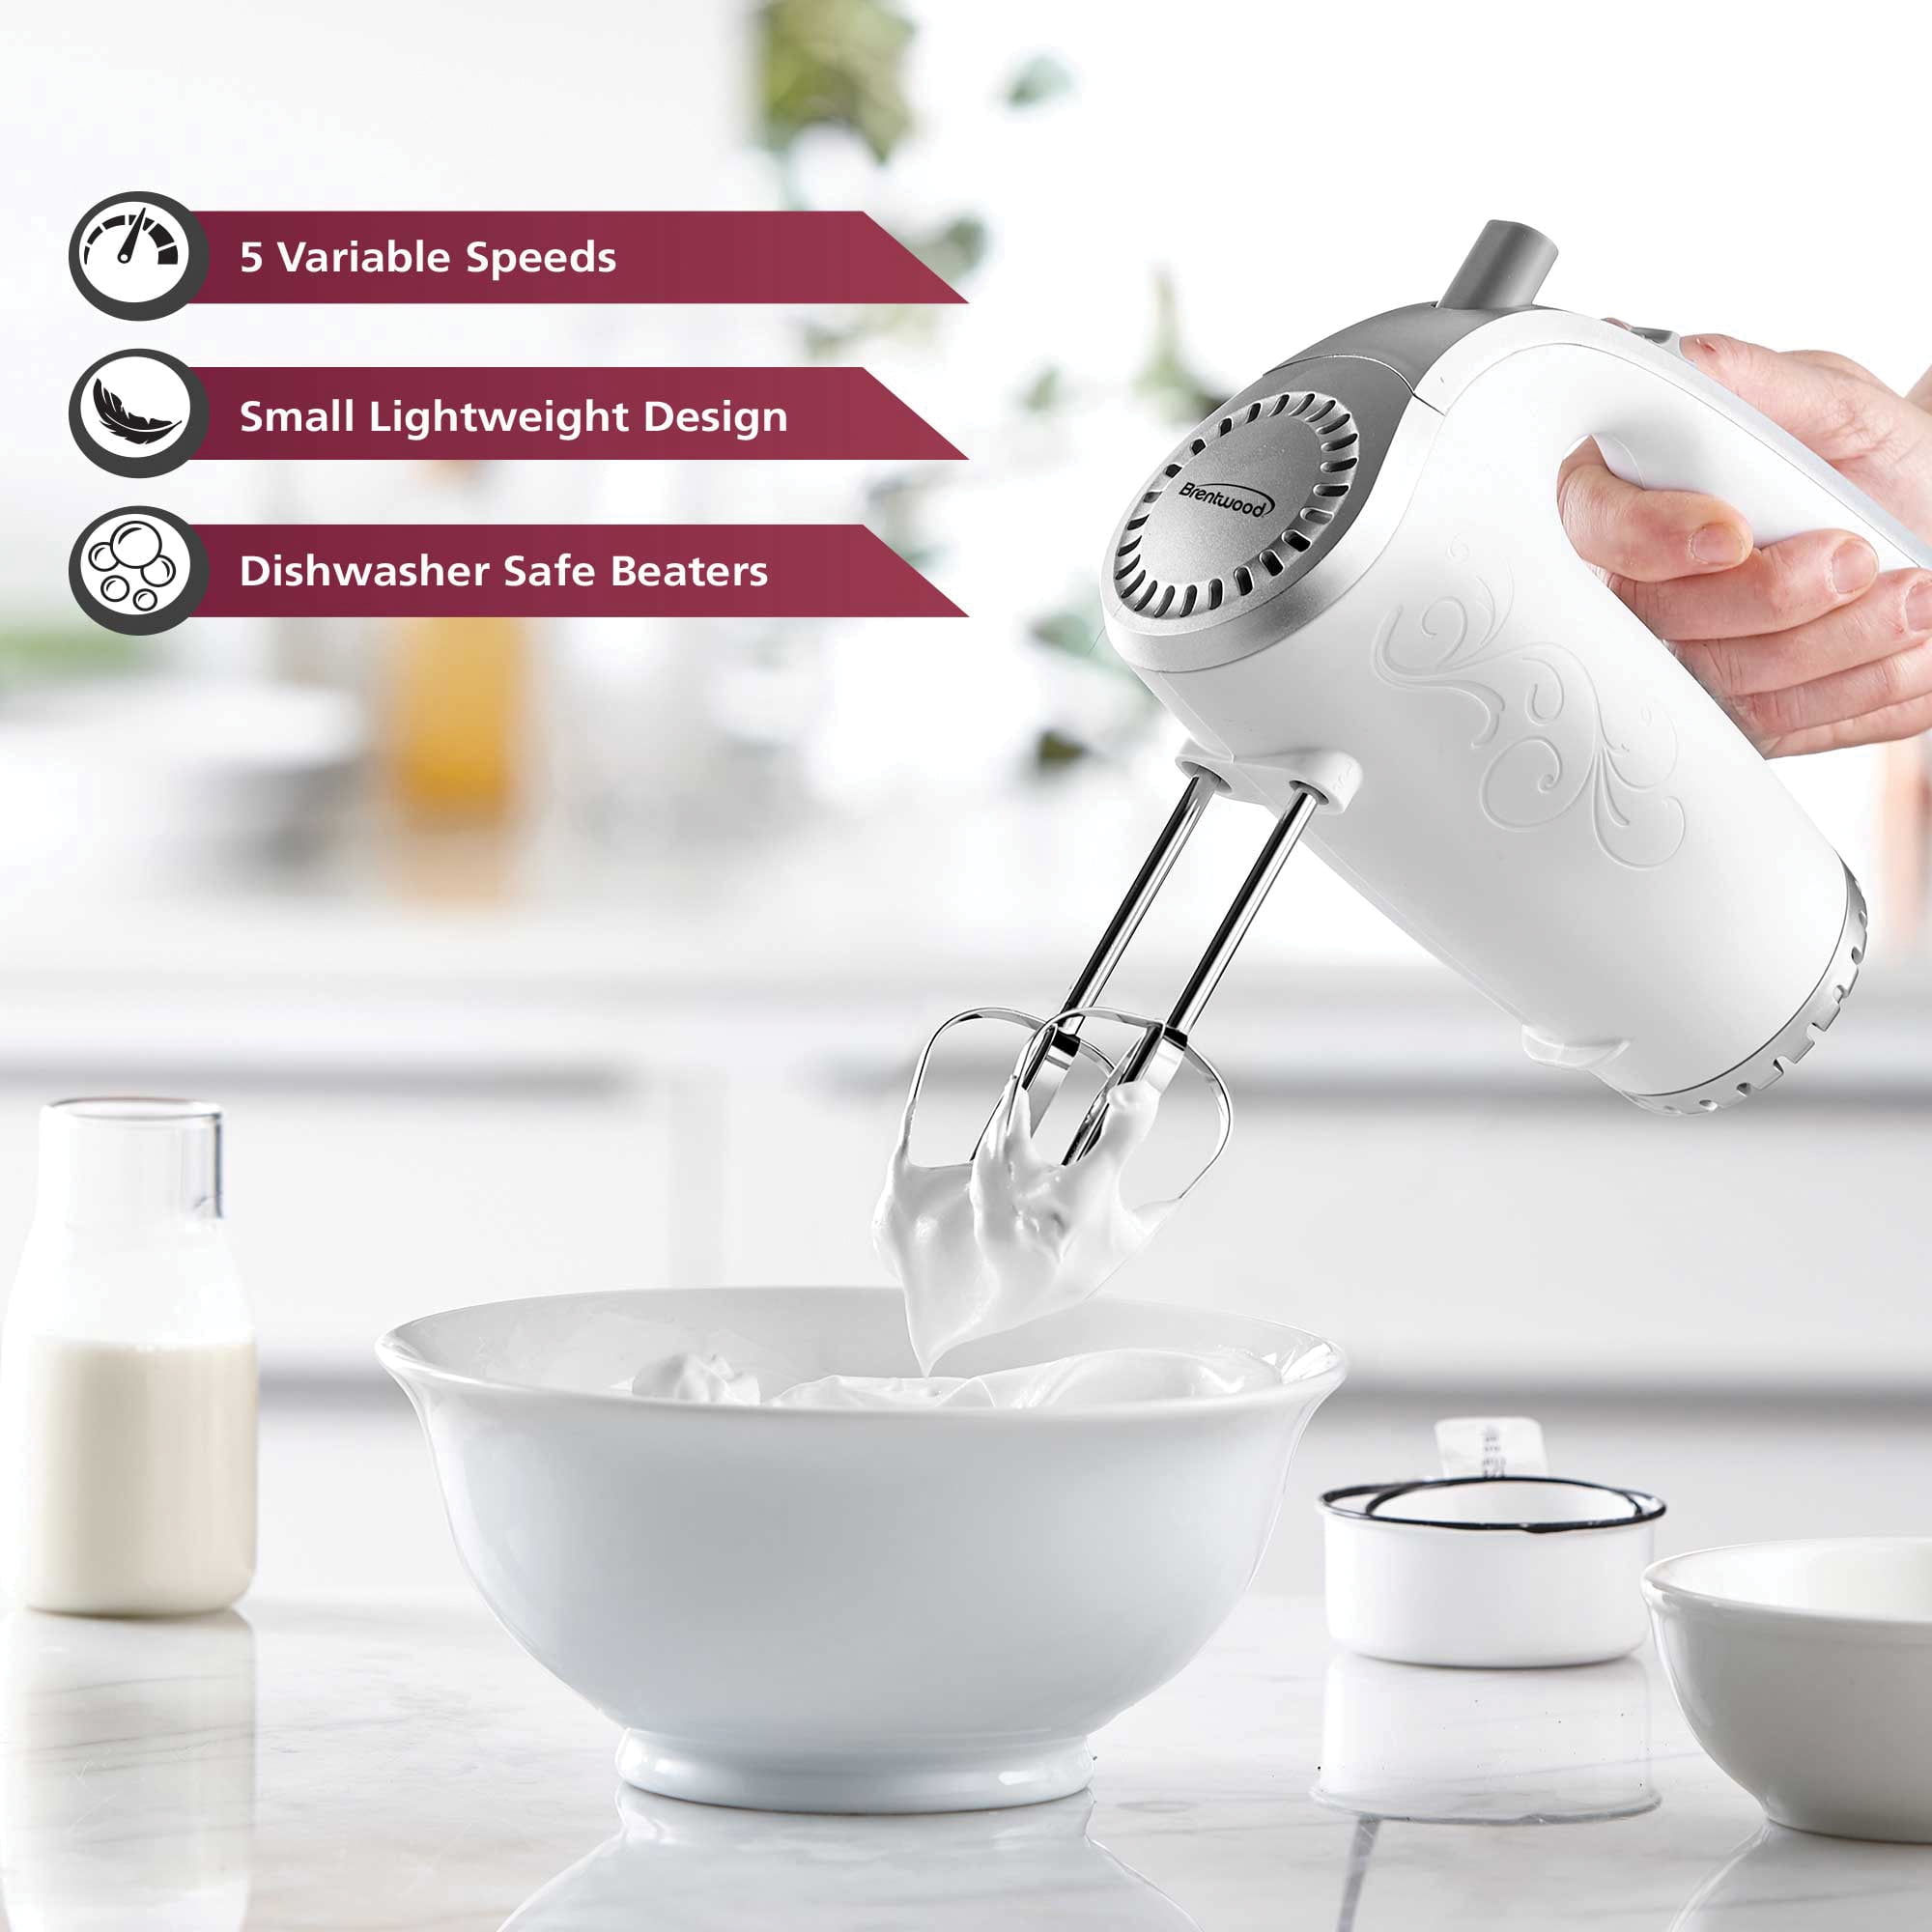 Myves MYVES Electric Hand Mixer - X1, 5 Speed Transmission Hand Mixer -  White - 667 requests